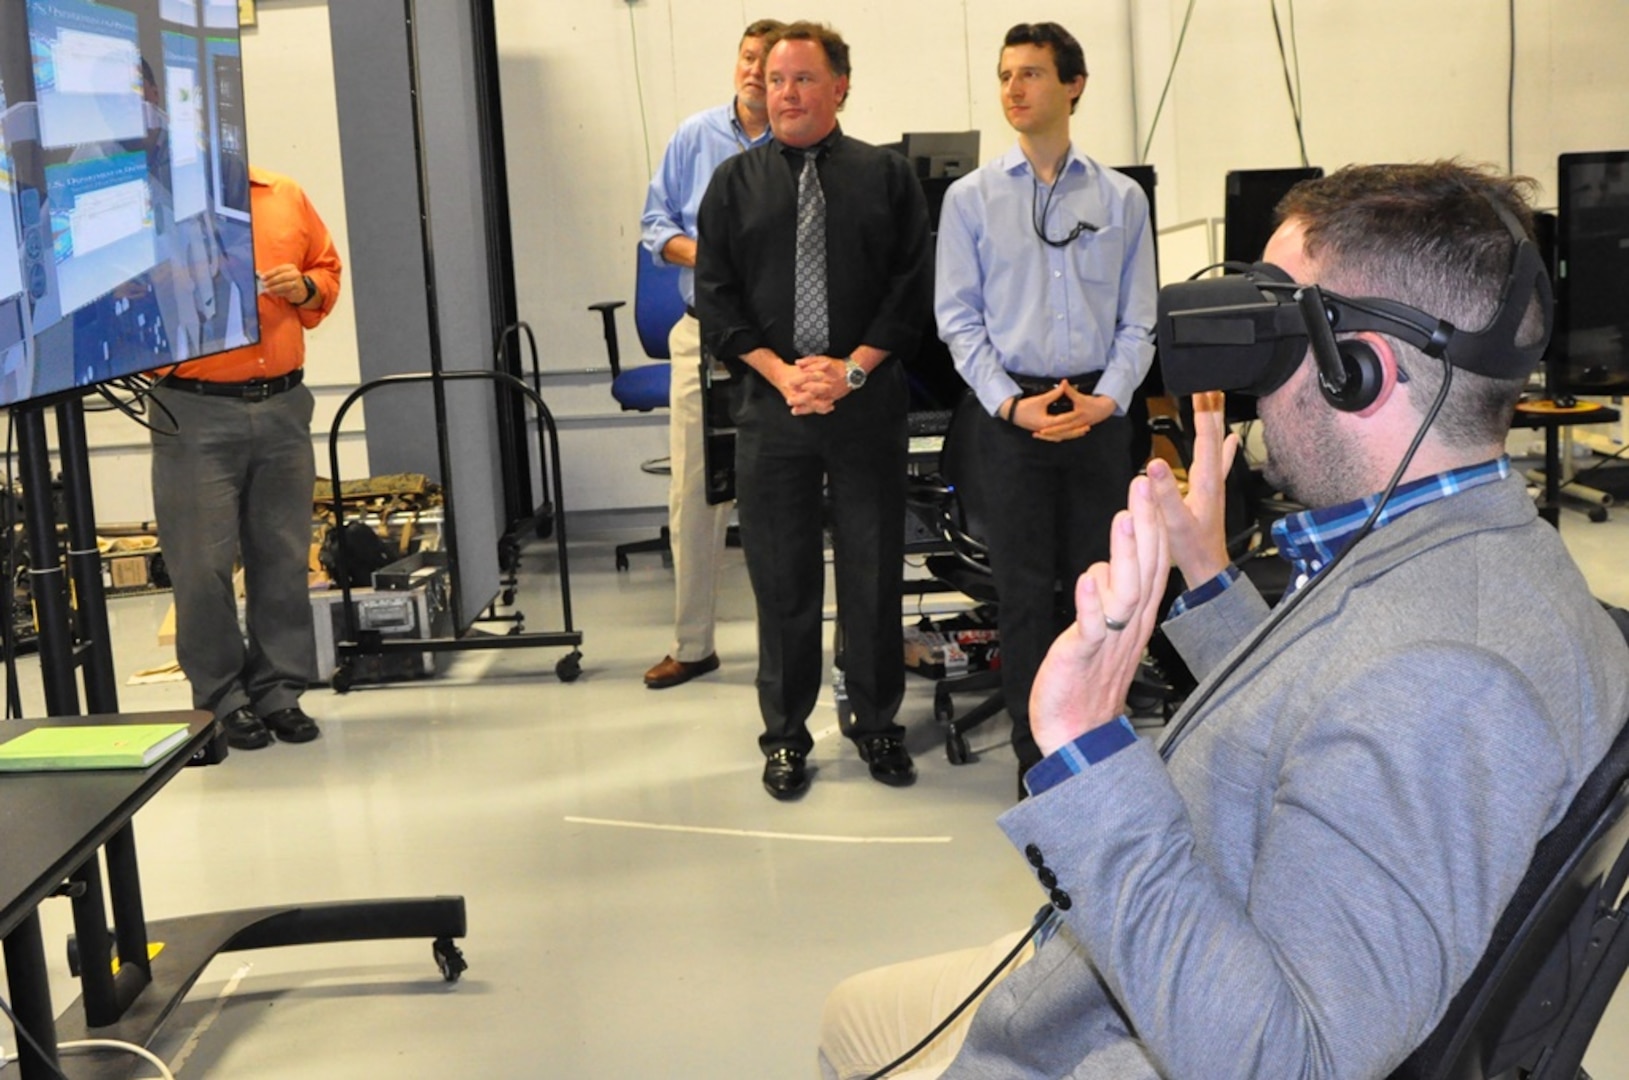 IMAGE: DAHLGREN, Va. (June 2018) - Dr. Patrick Mead from the NSWC Dahlgren Division Human Systems Integration Branch Science and Technology group demonstrates a virtual reality technology to Propel students. Mead's demonstration showed how commercial virtual reality technologies can be leveraged to enhance Navy design and training efforts, providing high fidelity simulation capabilities at lower costs and reduced implementation time. The five-day Propel course provides an introductory level awareness of Warfare Center expectations for new supervisors.  (U.S. Navy photo/Released)